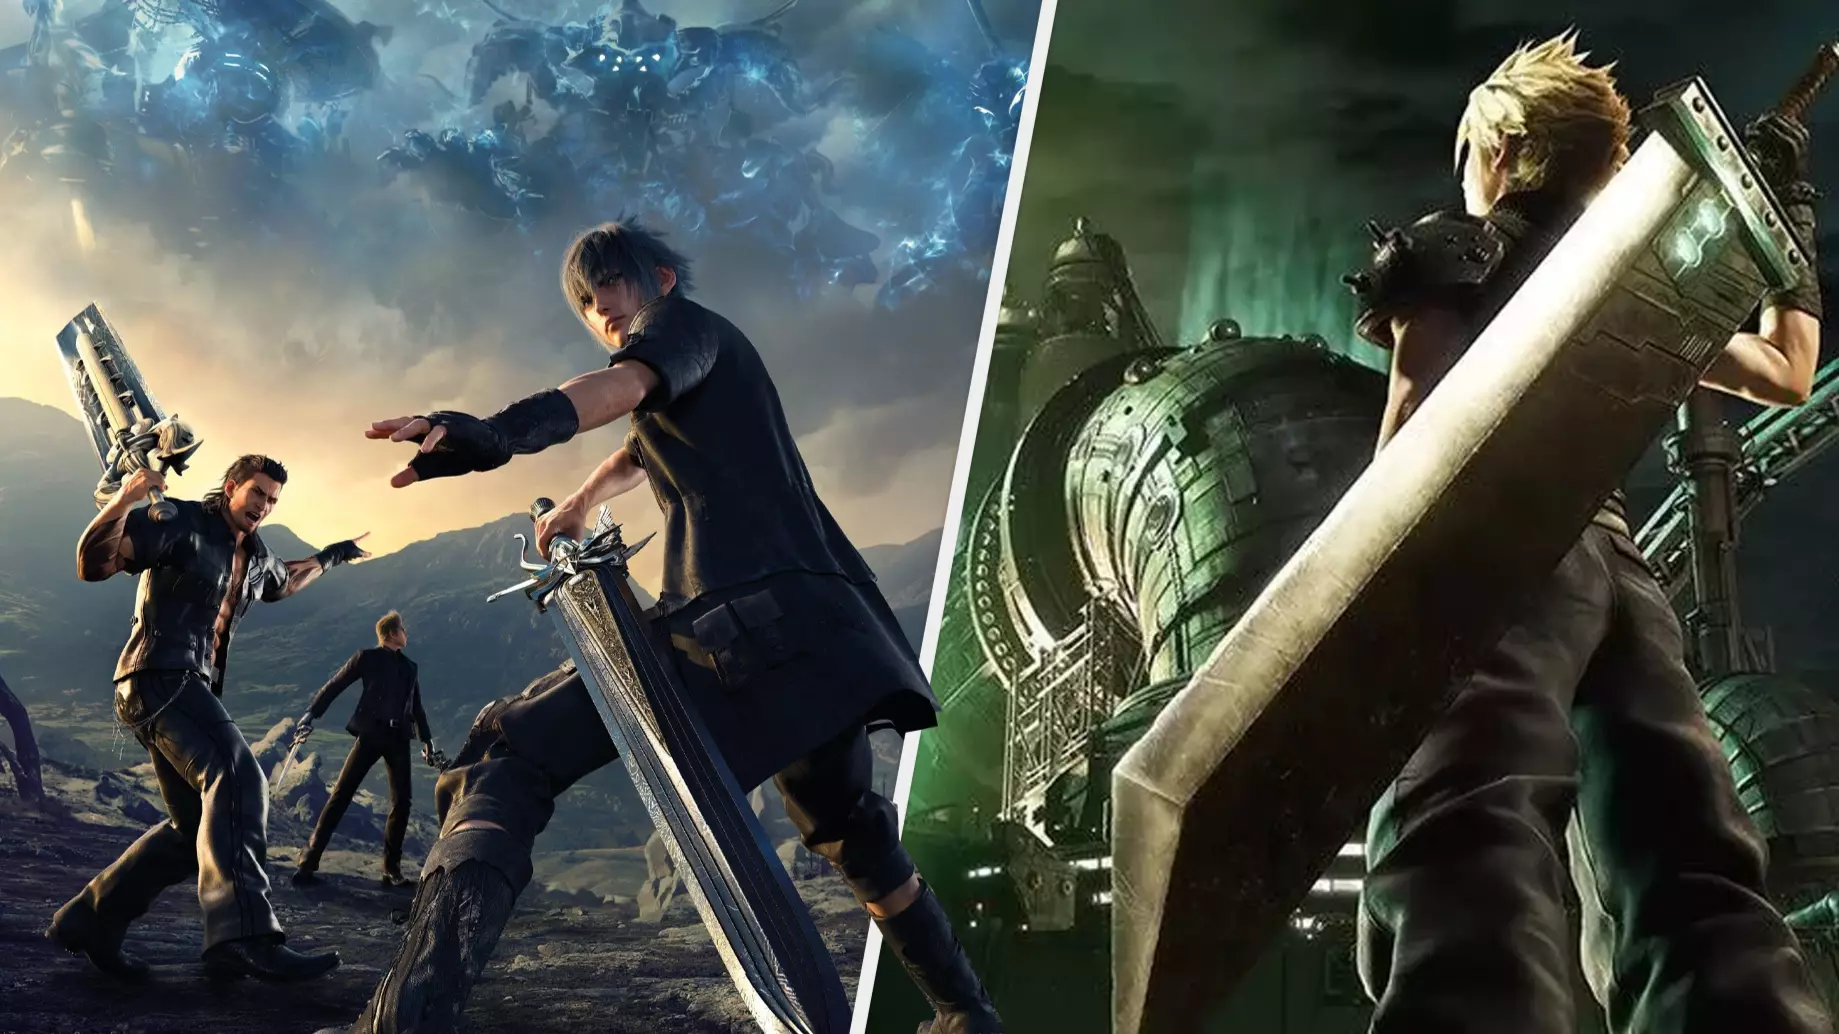 'Final Fantasy 16' To Be Revealed During PS5 Showcase, Developer Hints